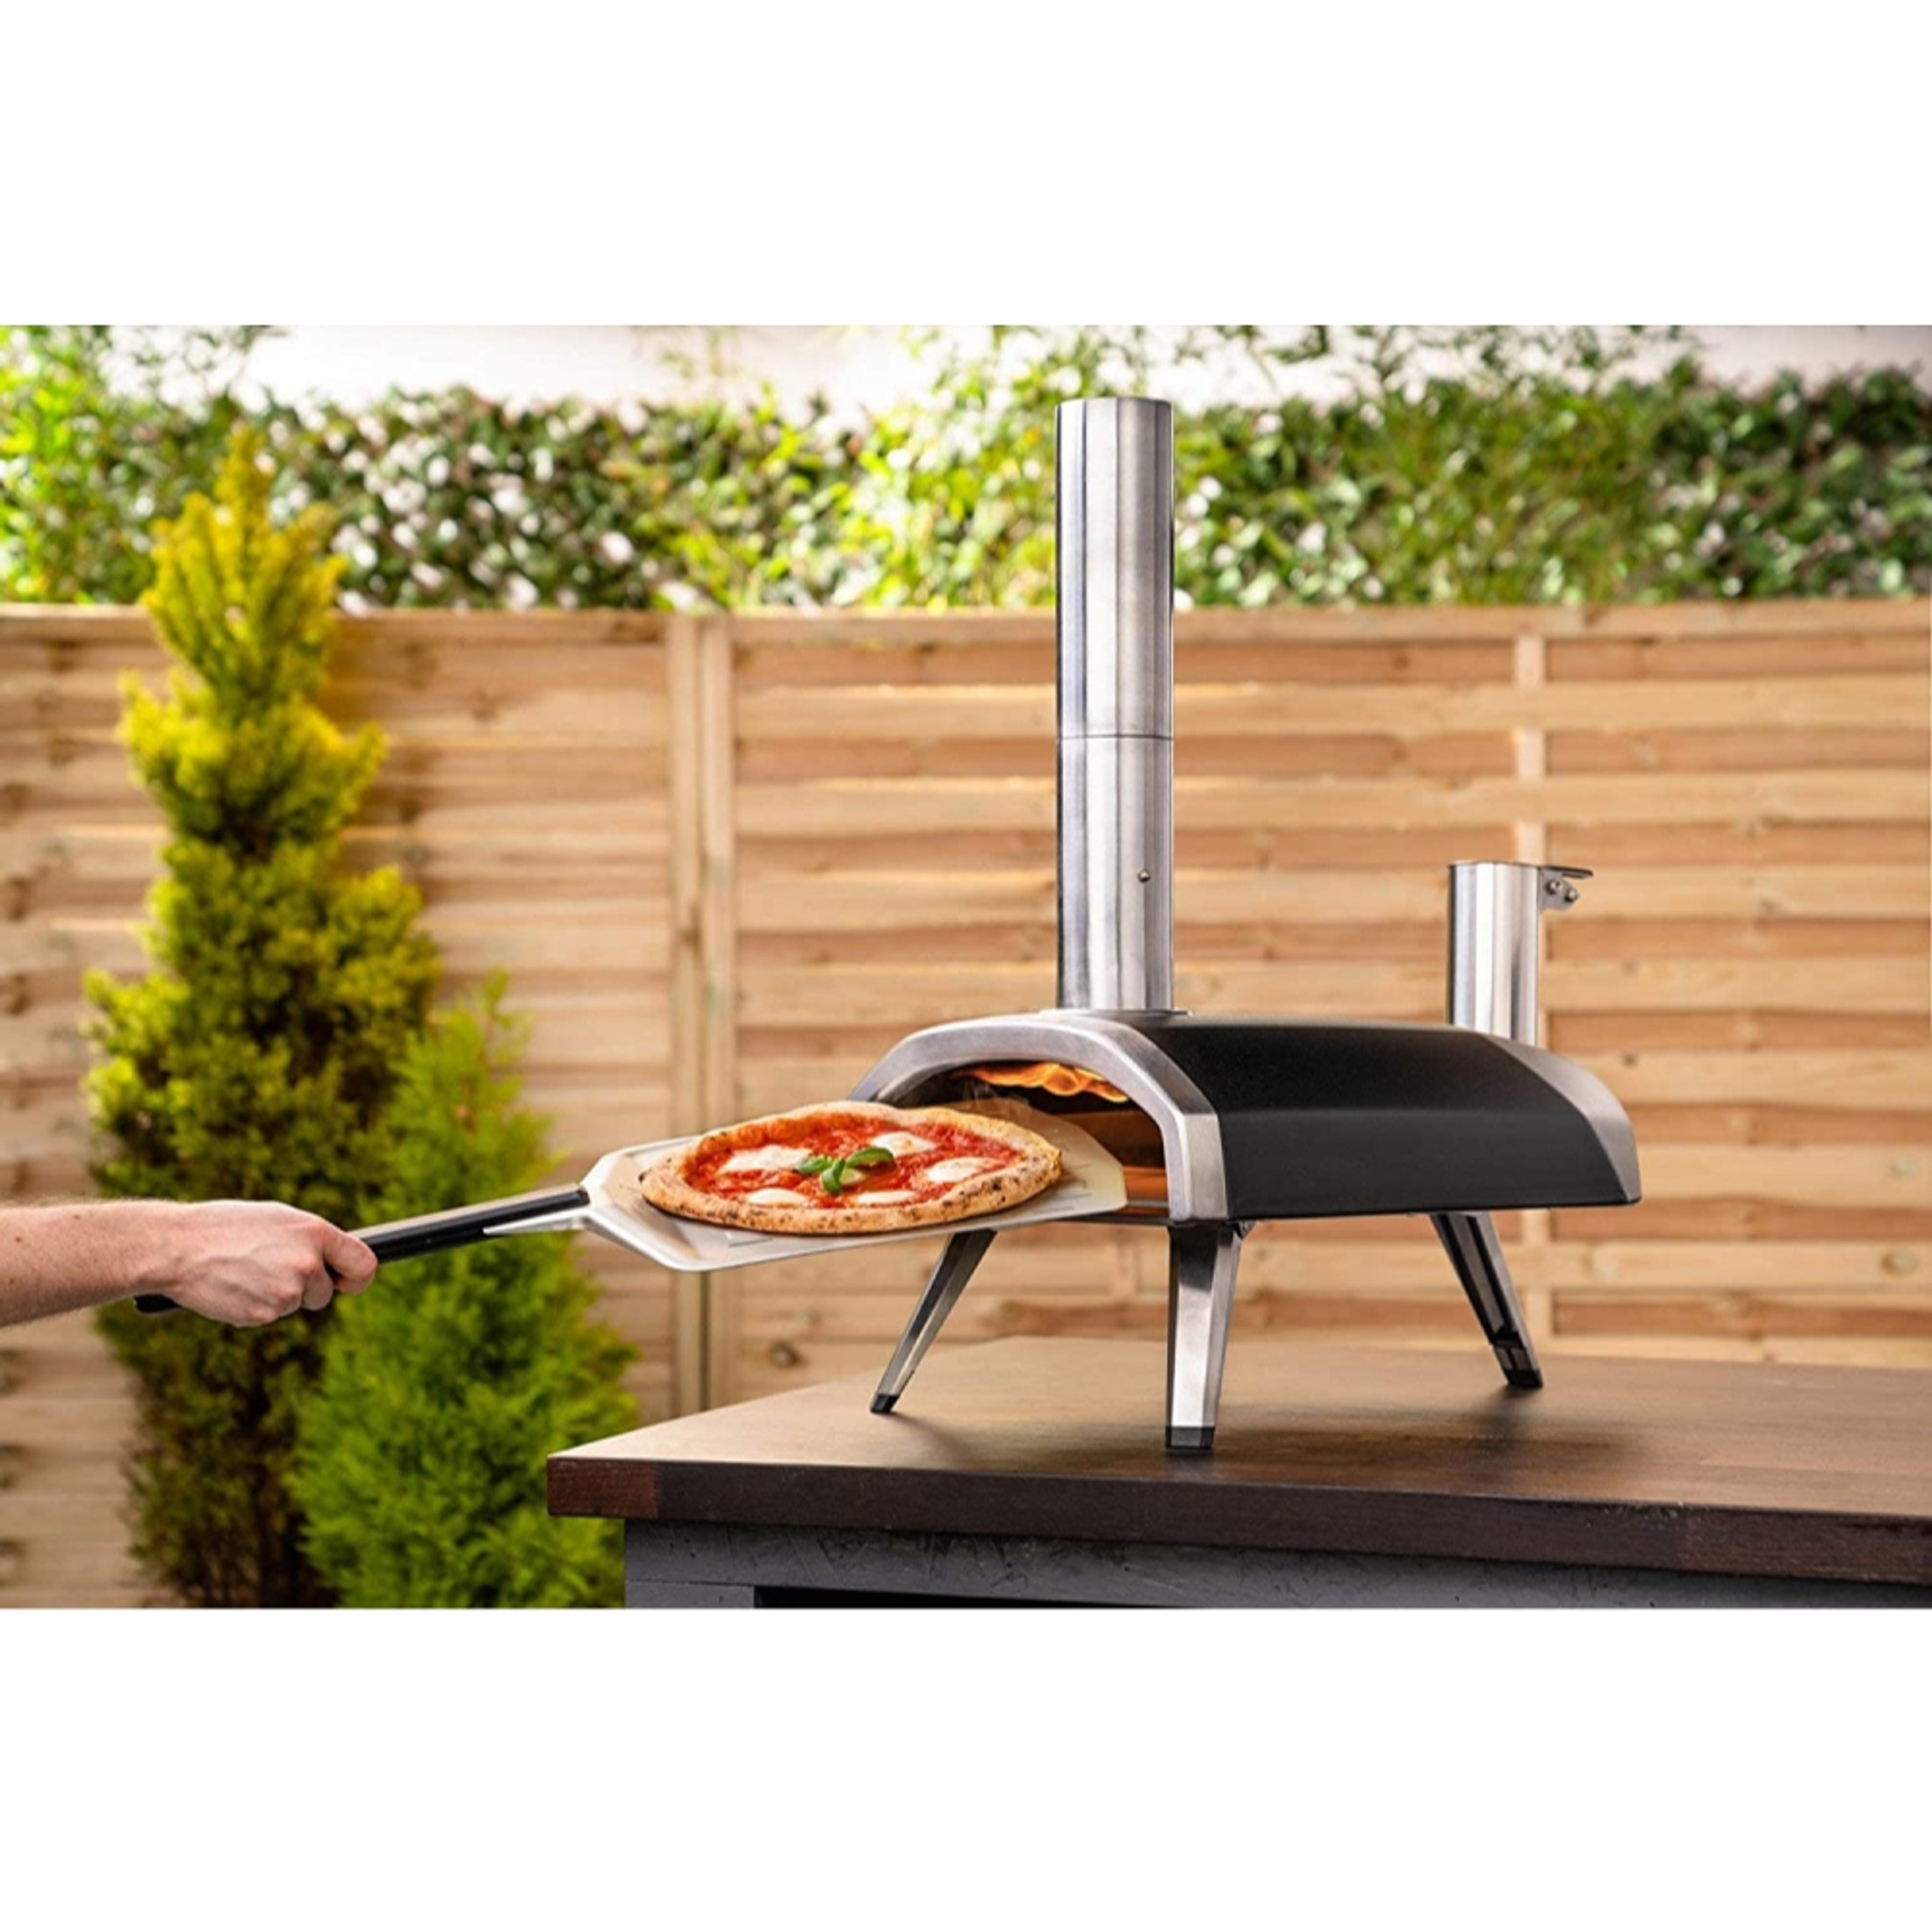 Ooni Fyra 12 Wood Fired Outdoor Pizza Oven, Portable Hard Wood Pellet Pizza Oven, DAMAGED BOX